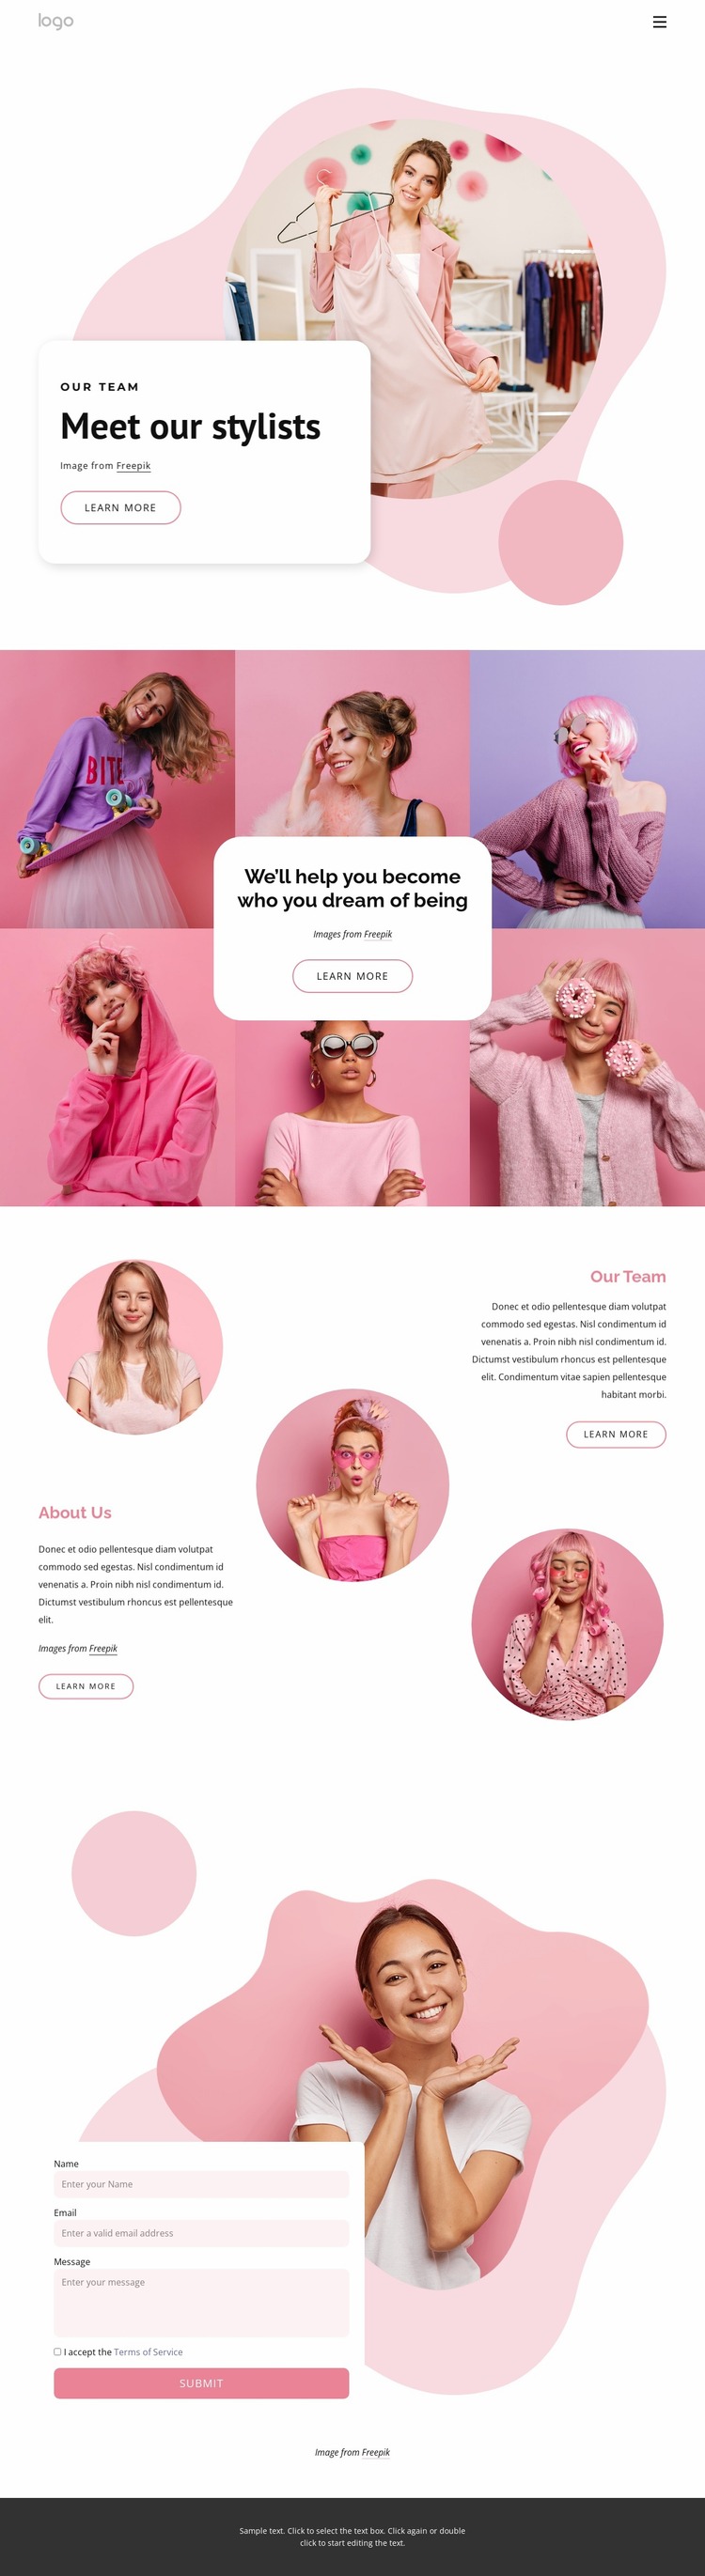 Meet our stylists Website Mockup